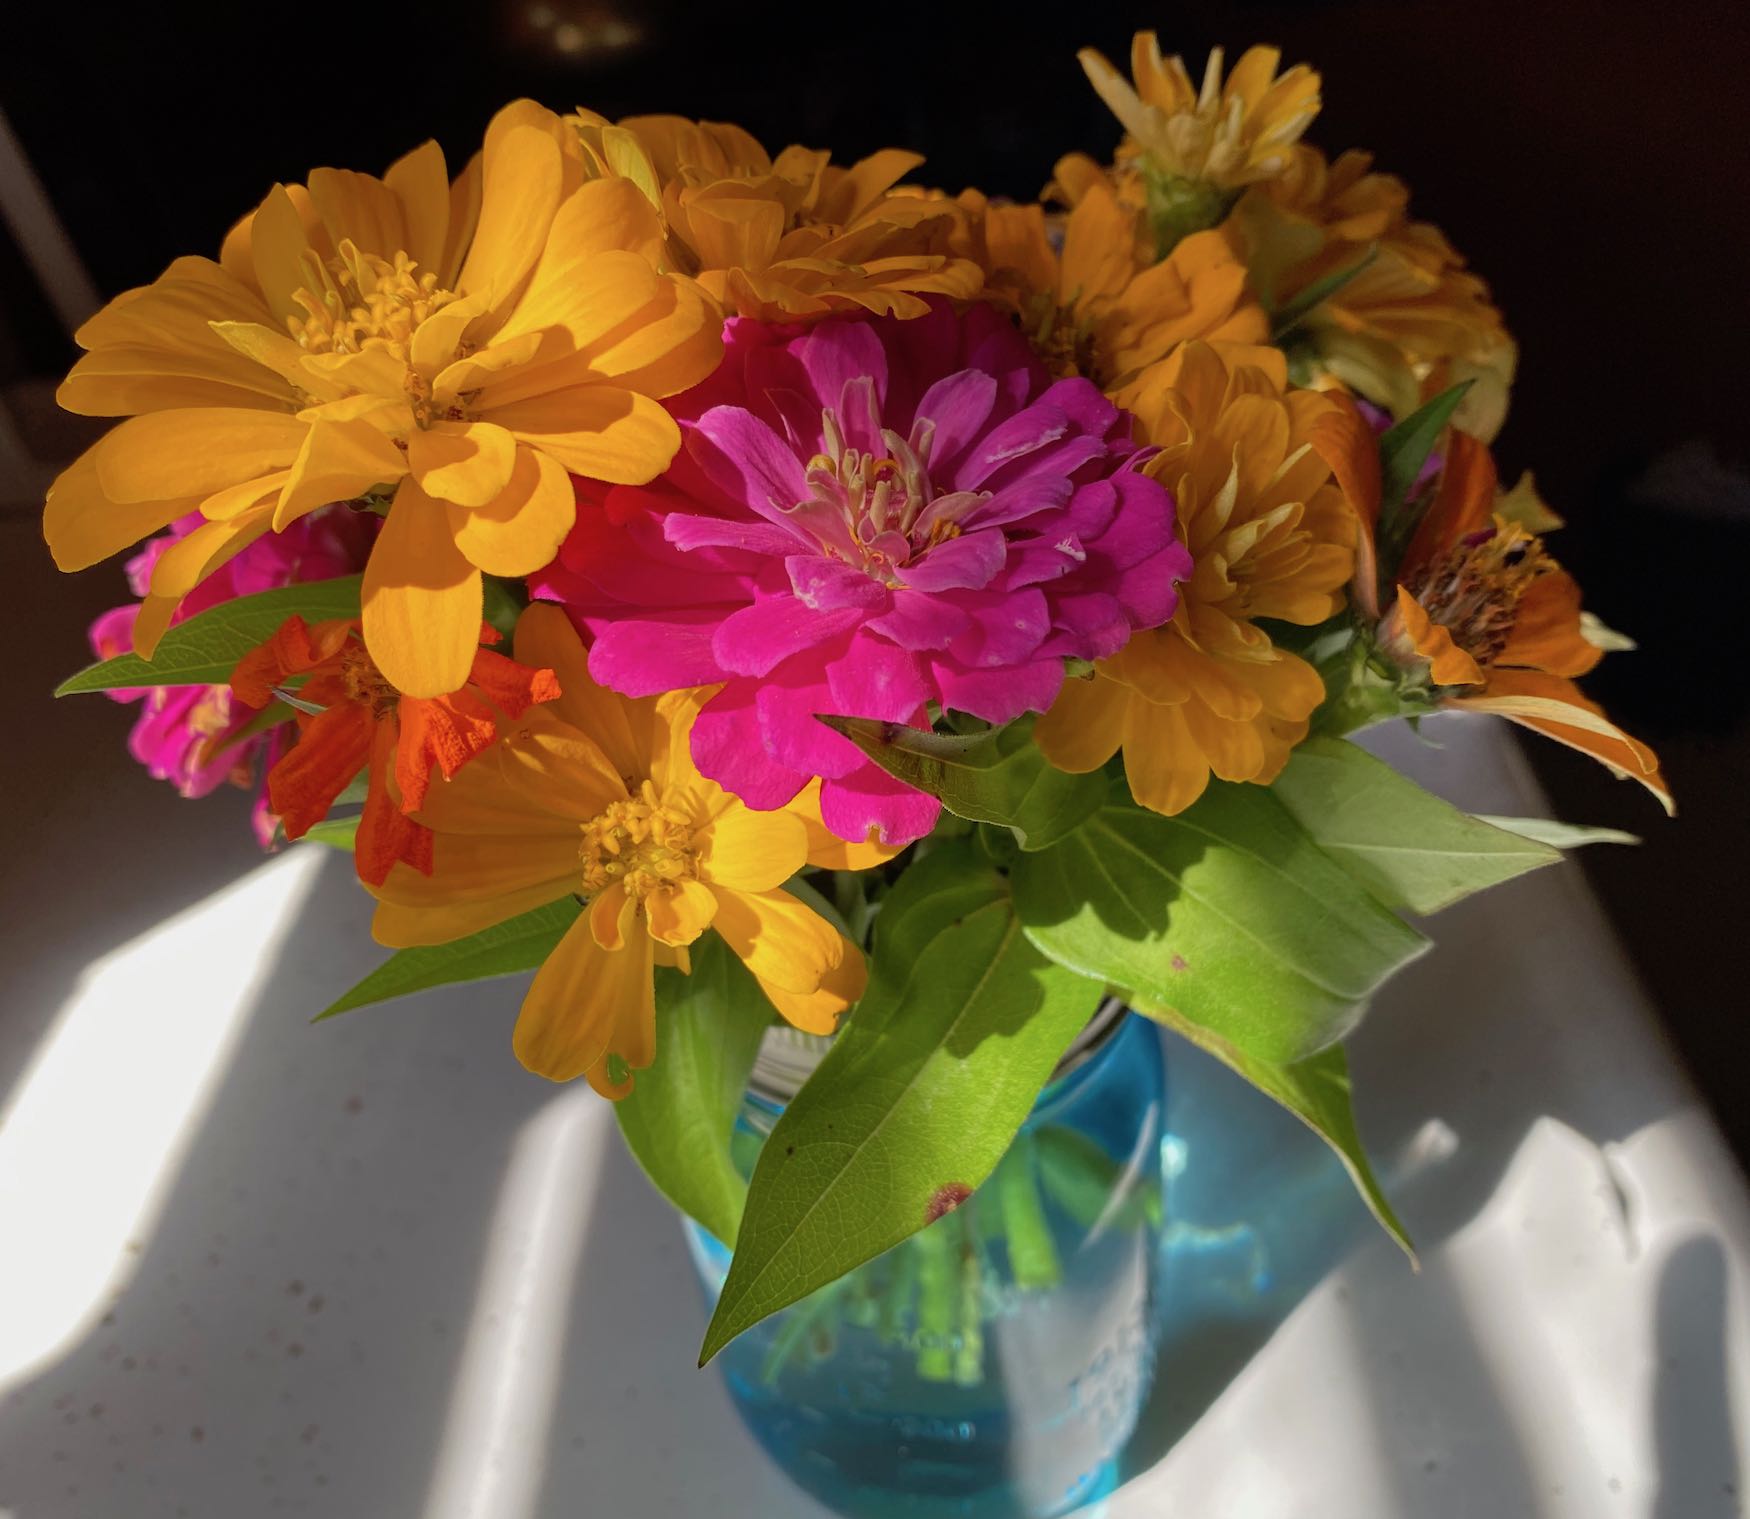 It's the weekend! Number 264, Zinnias on My Kitchen Counter